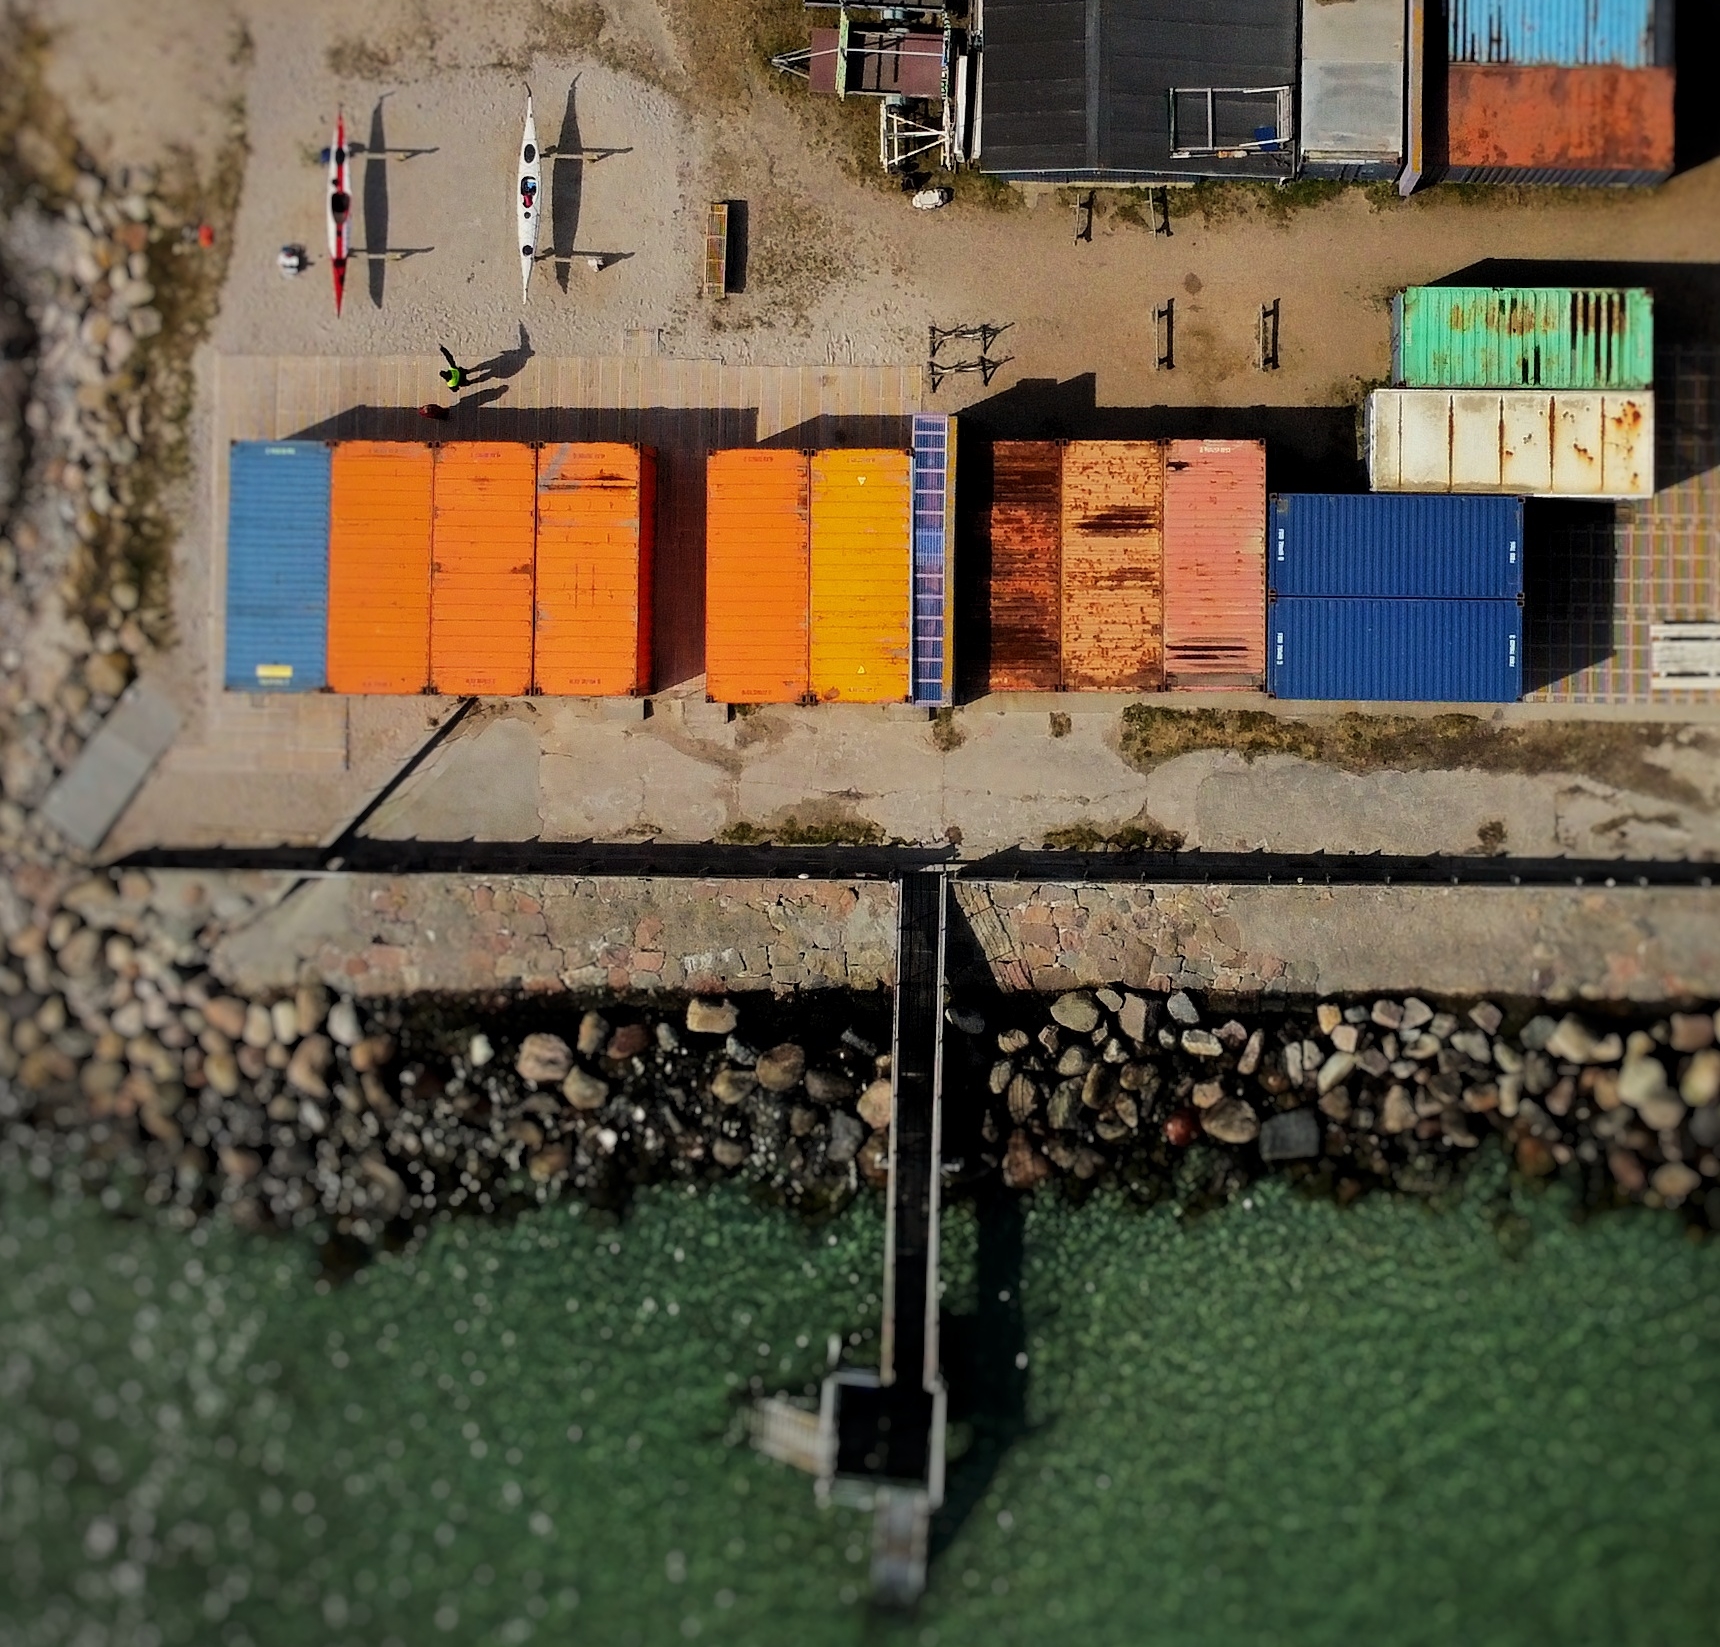 Container havn drone